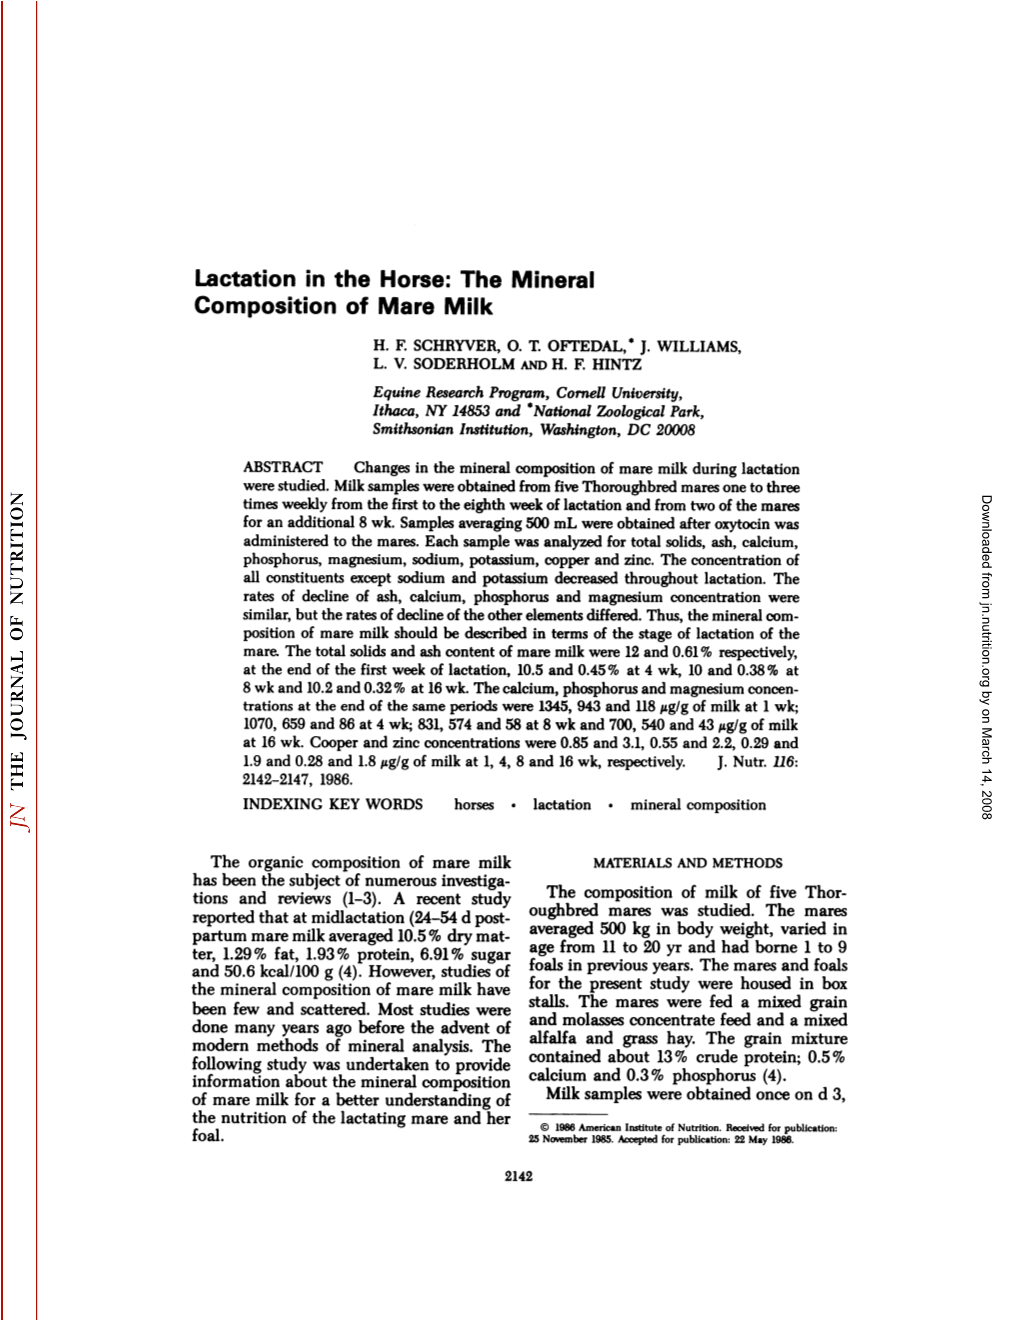 Lactation in the Horse: the Mineral Composition of Mare Milk H